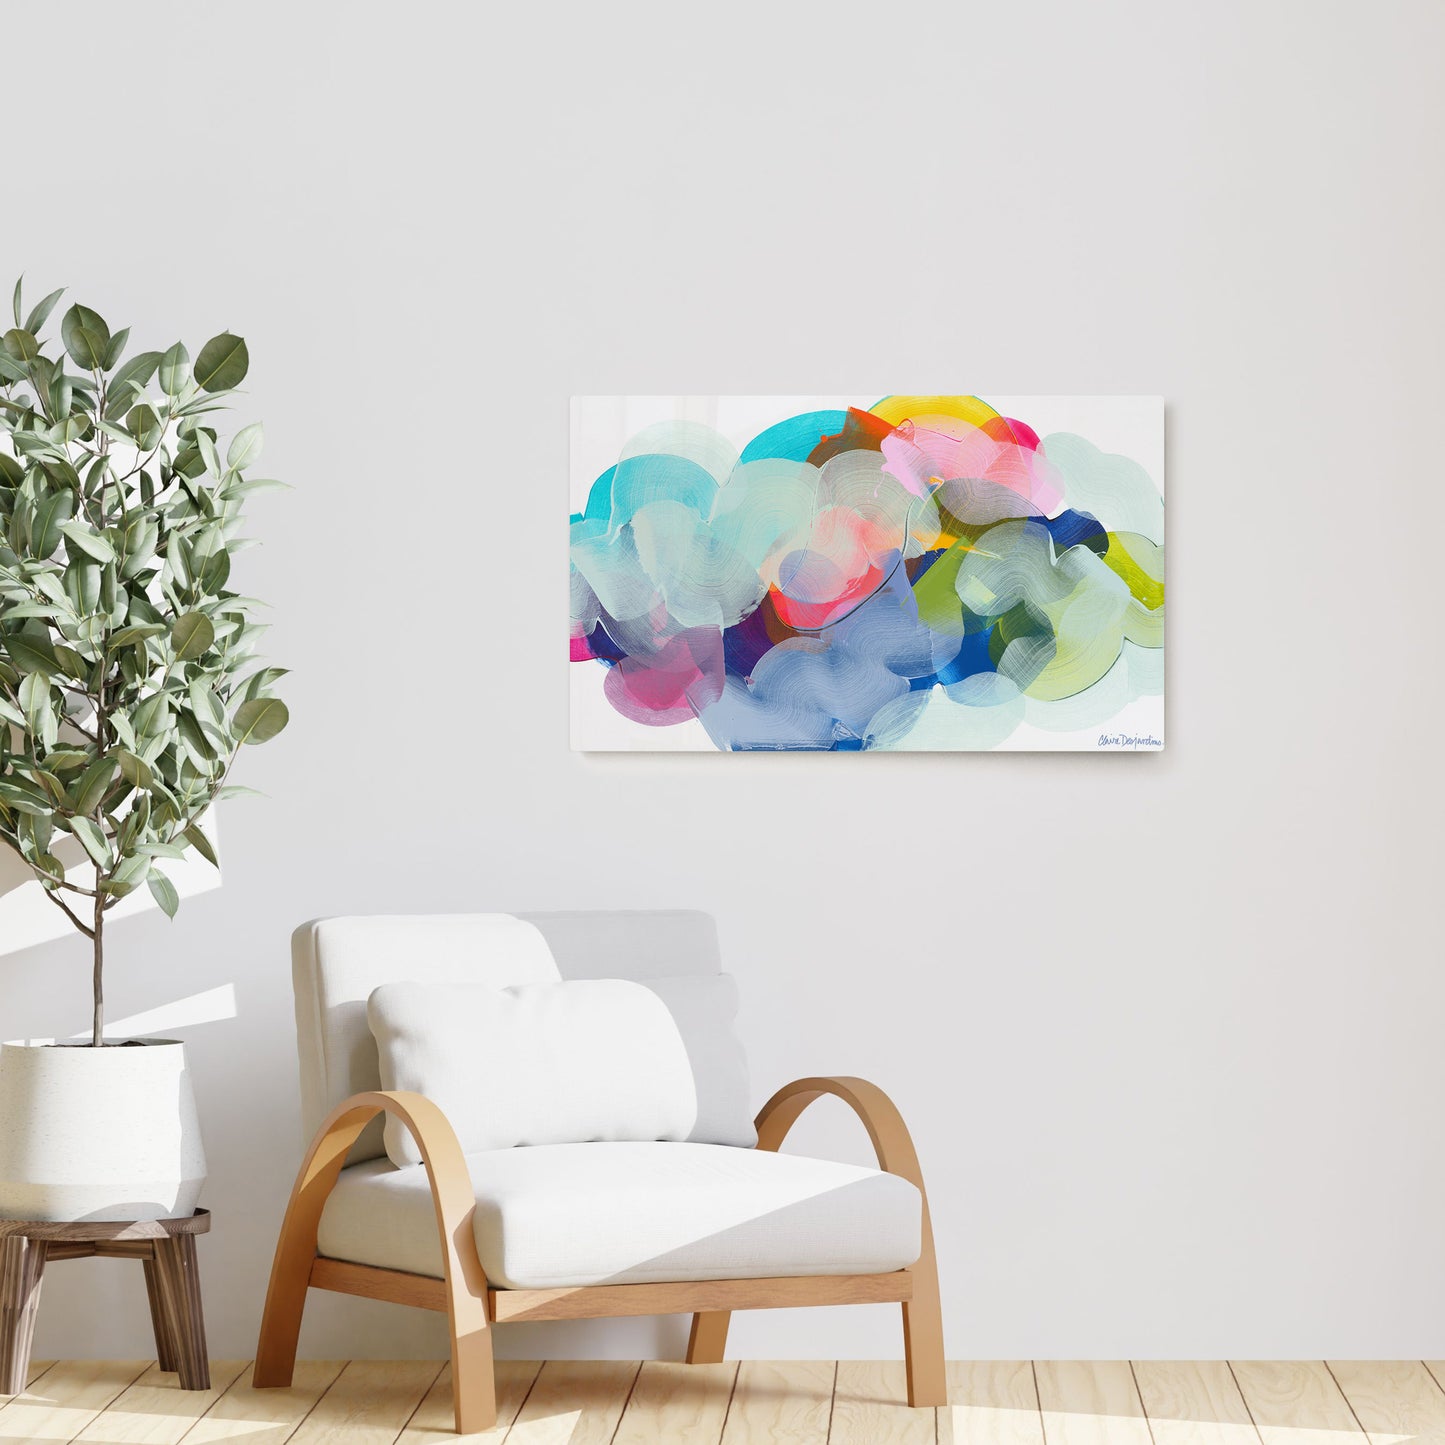 Claire Desjardins' Sea Glass painting reproduced on HD metal print and displayed on wall